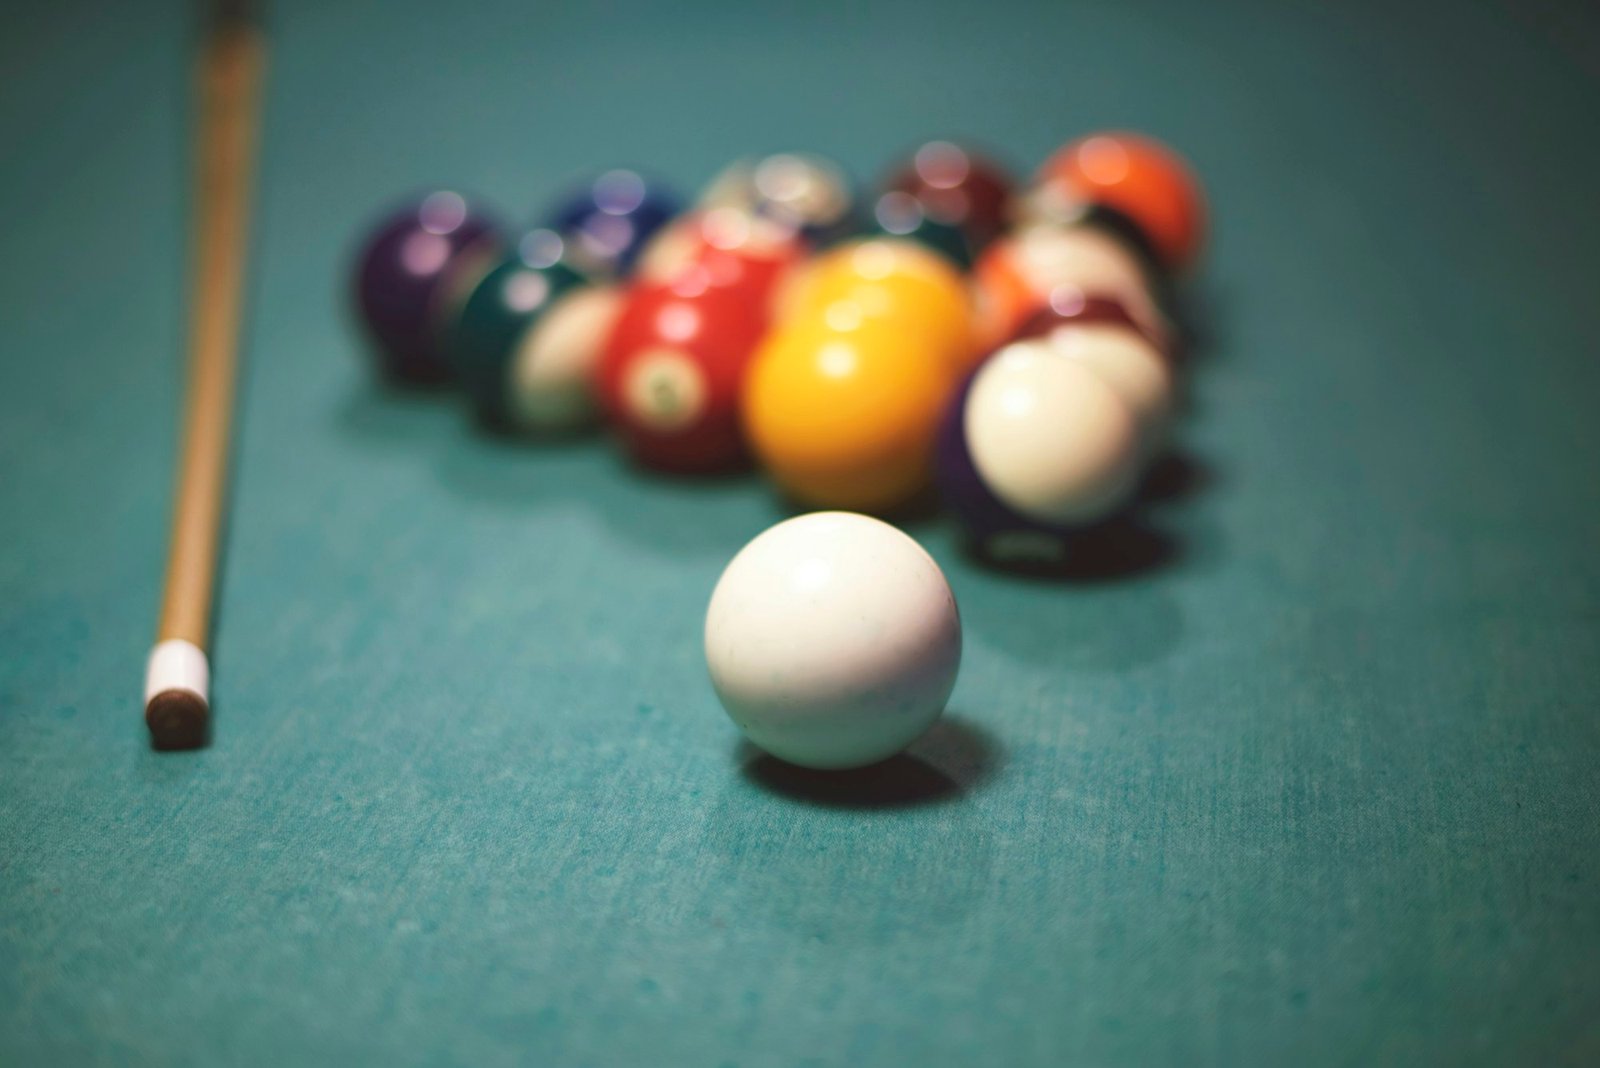 Pool table with pool equipment